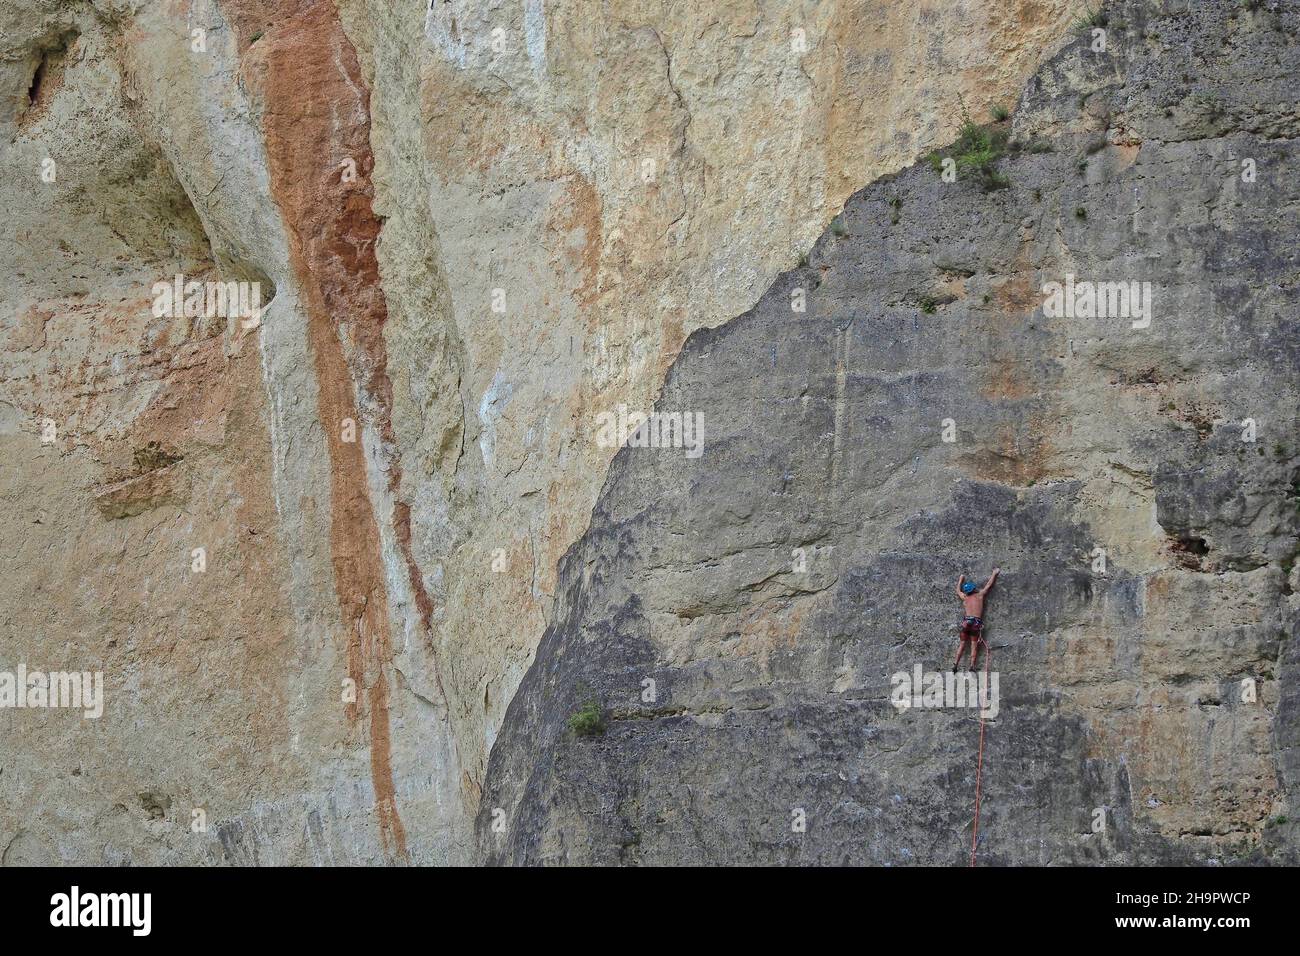 Climber on rope in rock face, steep face, rock plateau, mountaineering, steep face climber, climbing, rock climbing, roped down, roped up, climbing Stock Photo